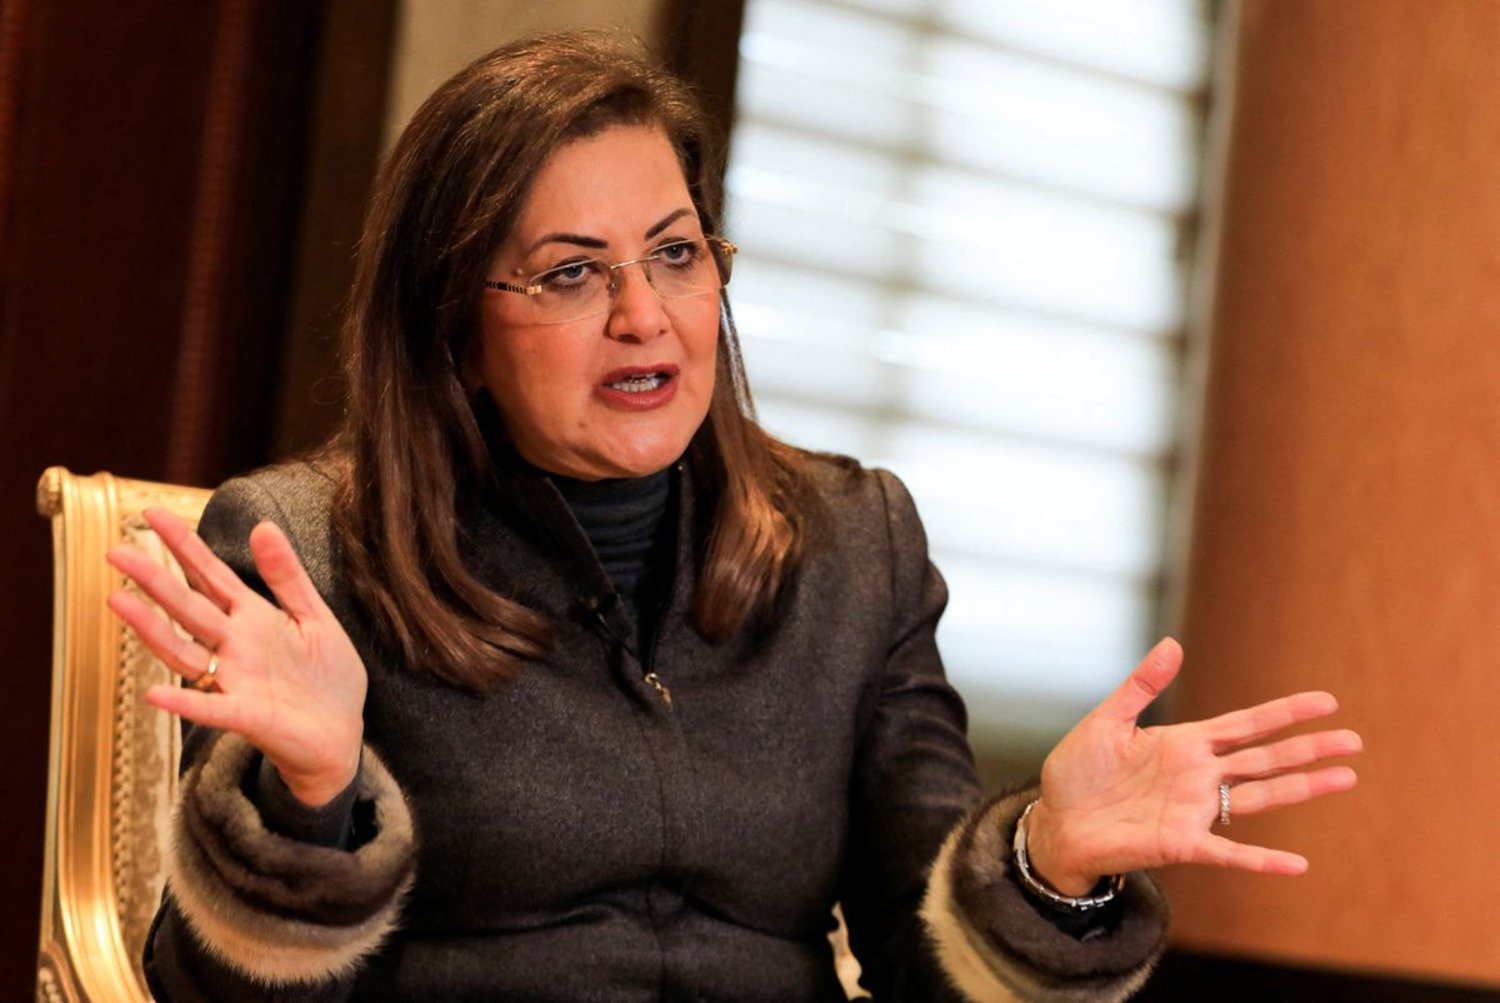 Egypt's Minister of Planning Hala al-Said speaks on the country's economic outlook and post-COVID-19 recovery during an interview with Reuters at her office in Cairo, Egypt, January 24, 2022. Picture taken January 24, 2022. (Reuters)